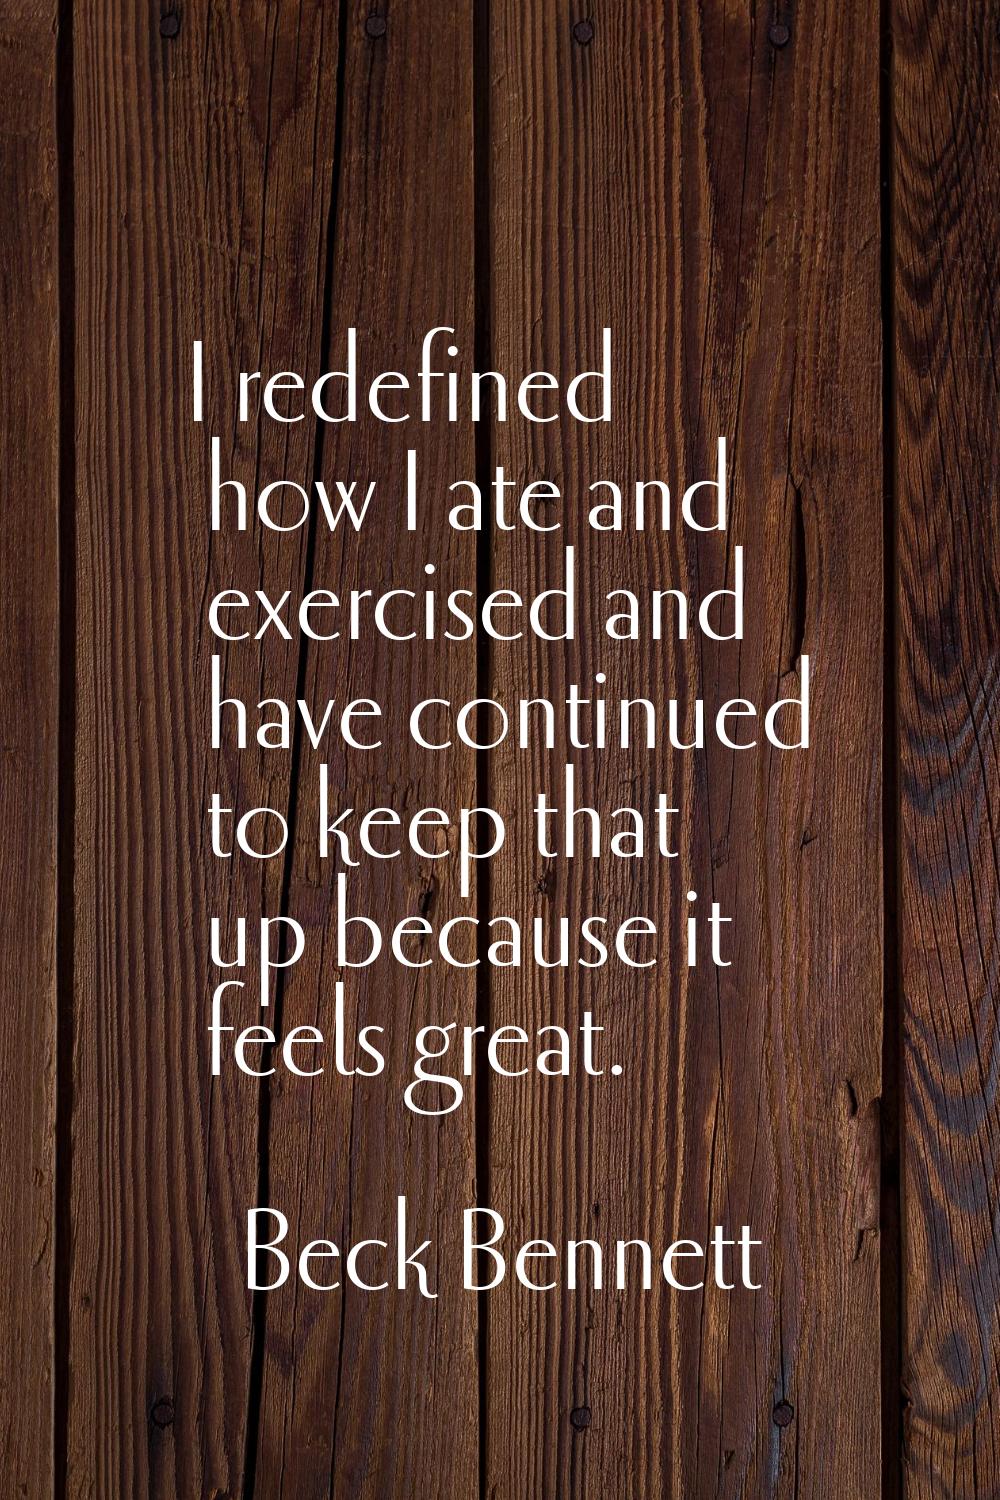 I redefined how I ate and exercised and have continued to keep that up because it feels great.